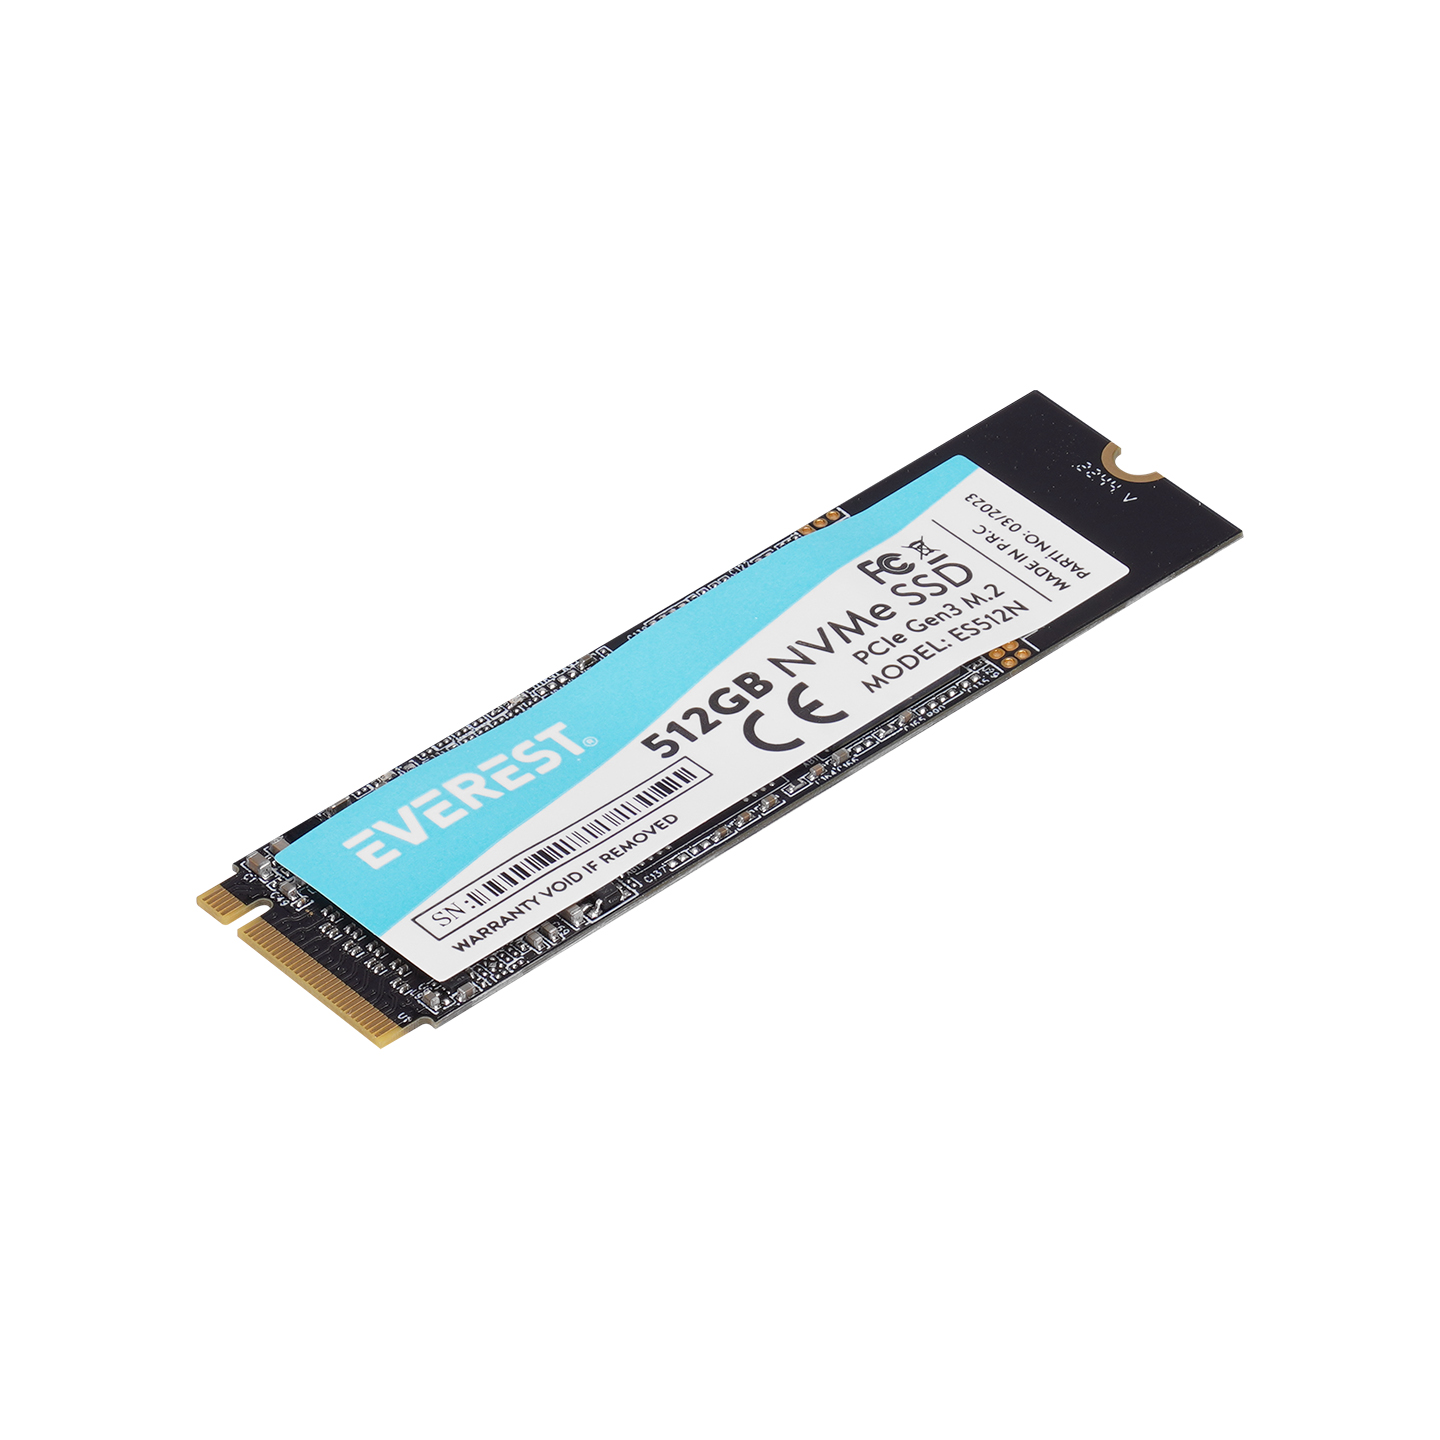 Everest ES512N 512GB 3D NAND Flash 2500MB/1800MB PCIe Gen3 NVMe M.2 SSD (Solid State Drive)